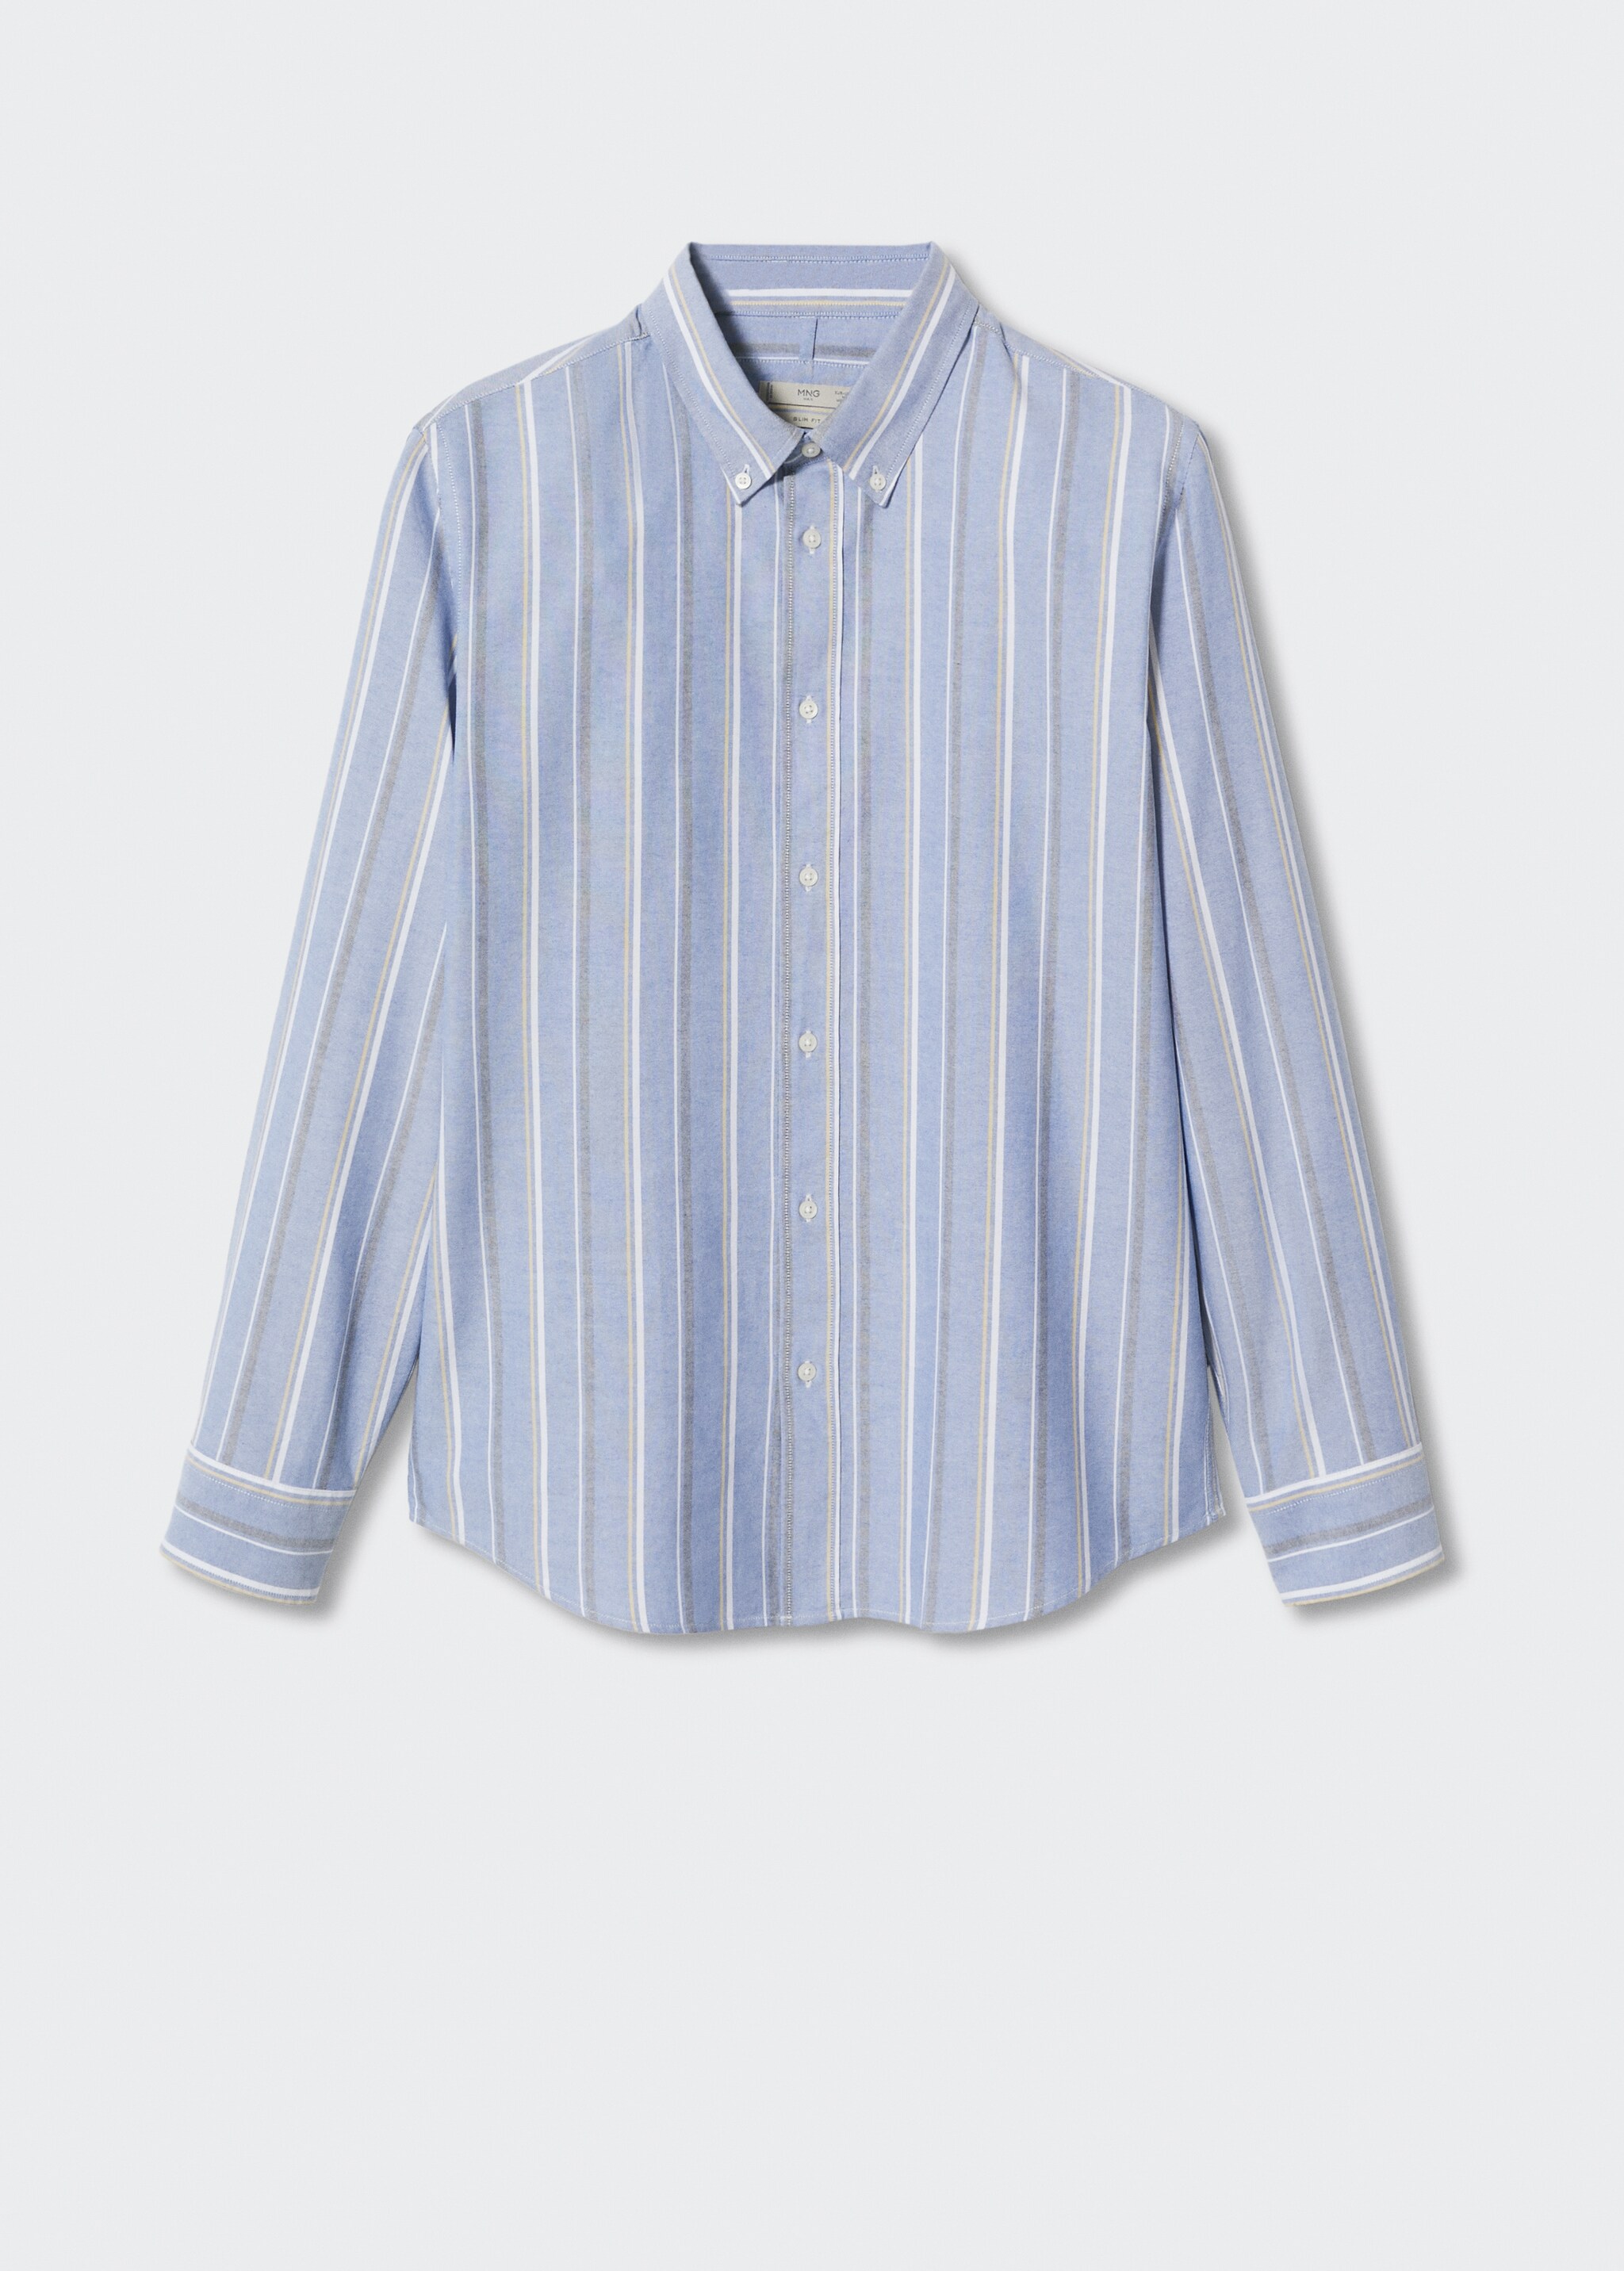 Striped cotton shirt - Article without model